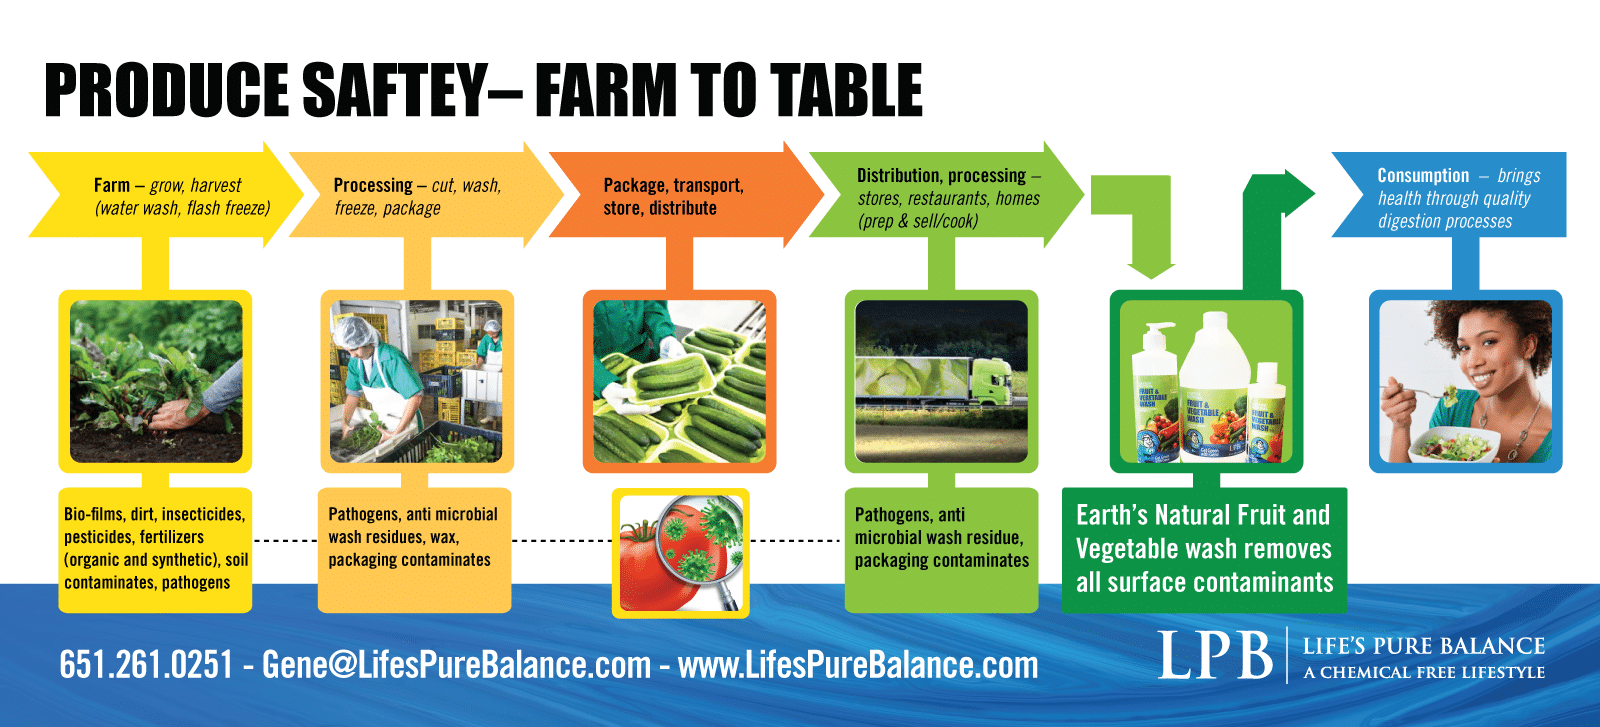 Fruit and Vegetable produce Safety is very important from Farm to Table.